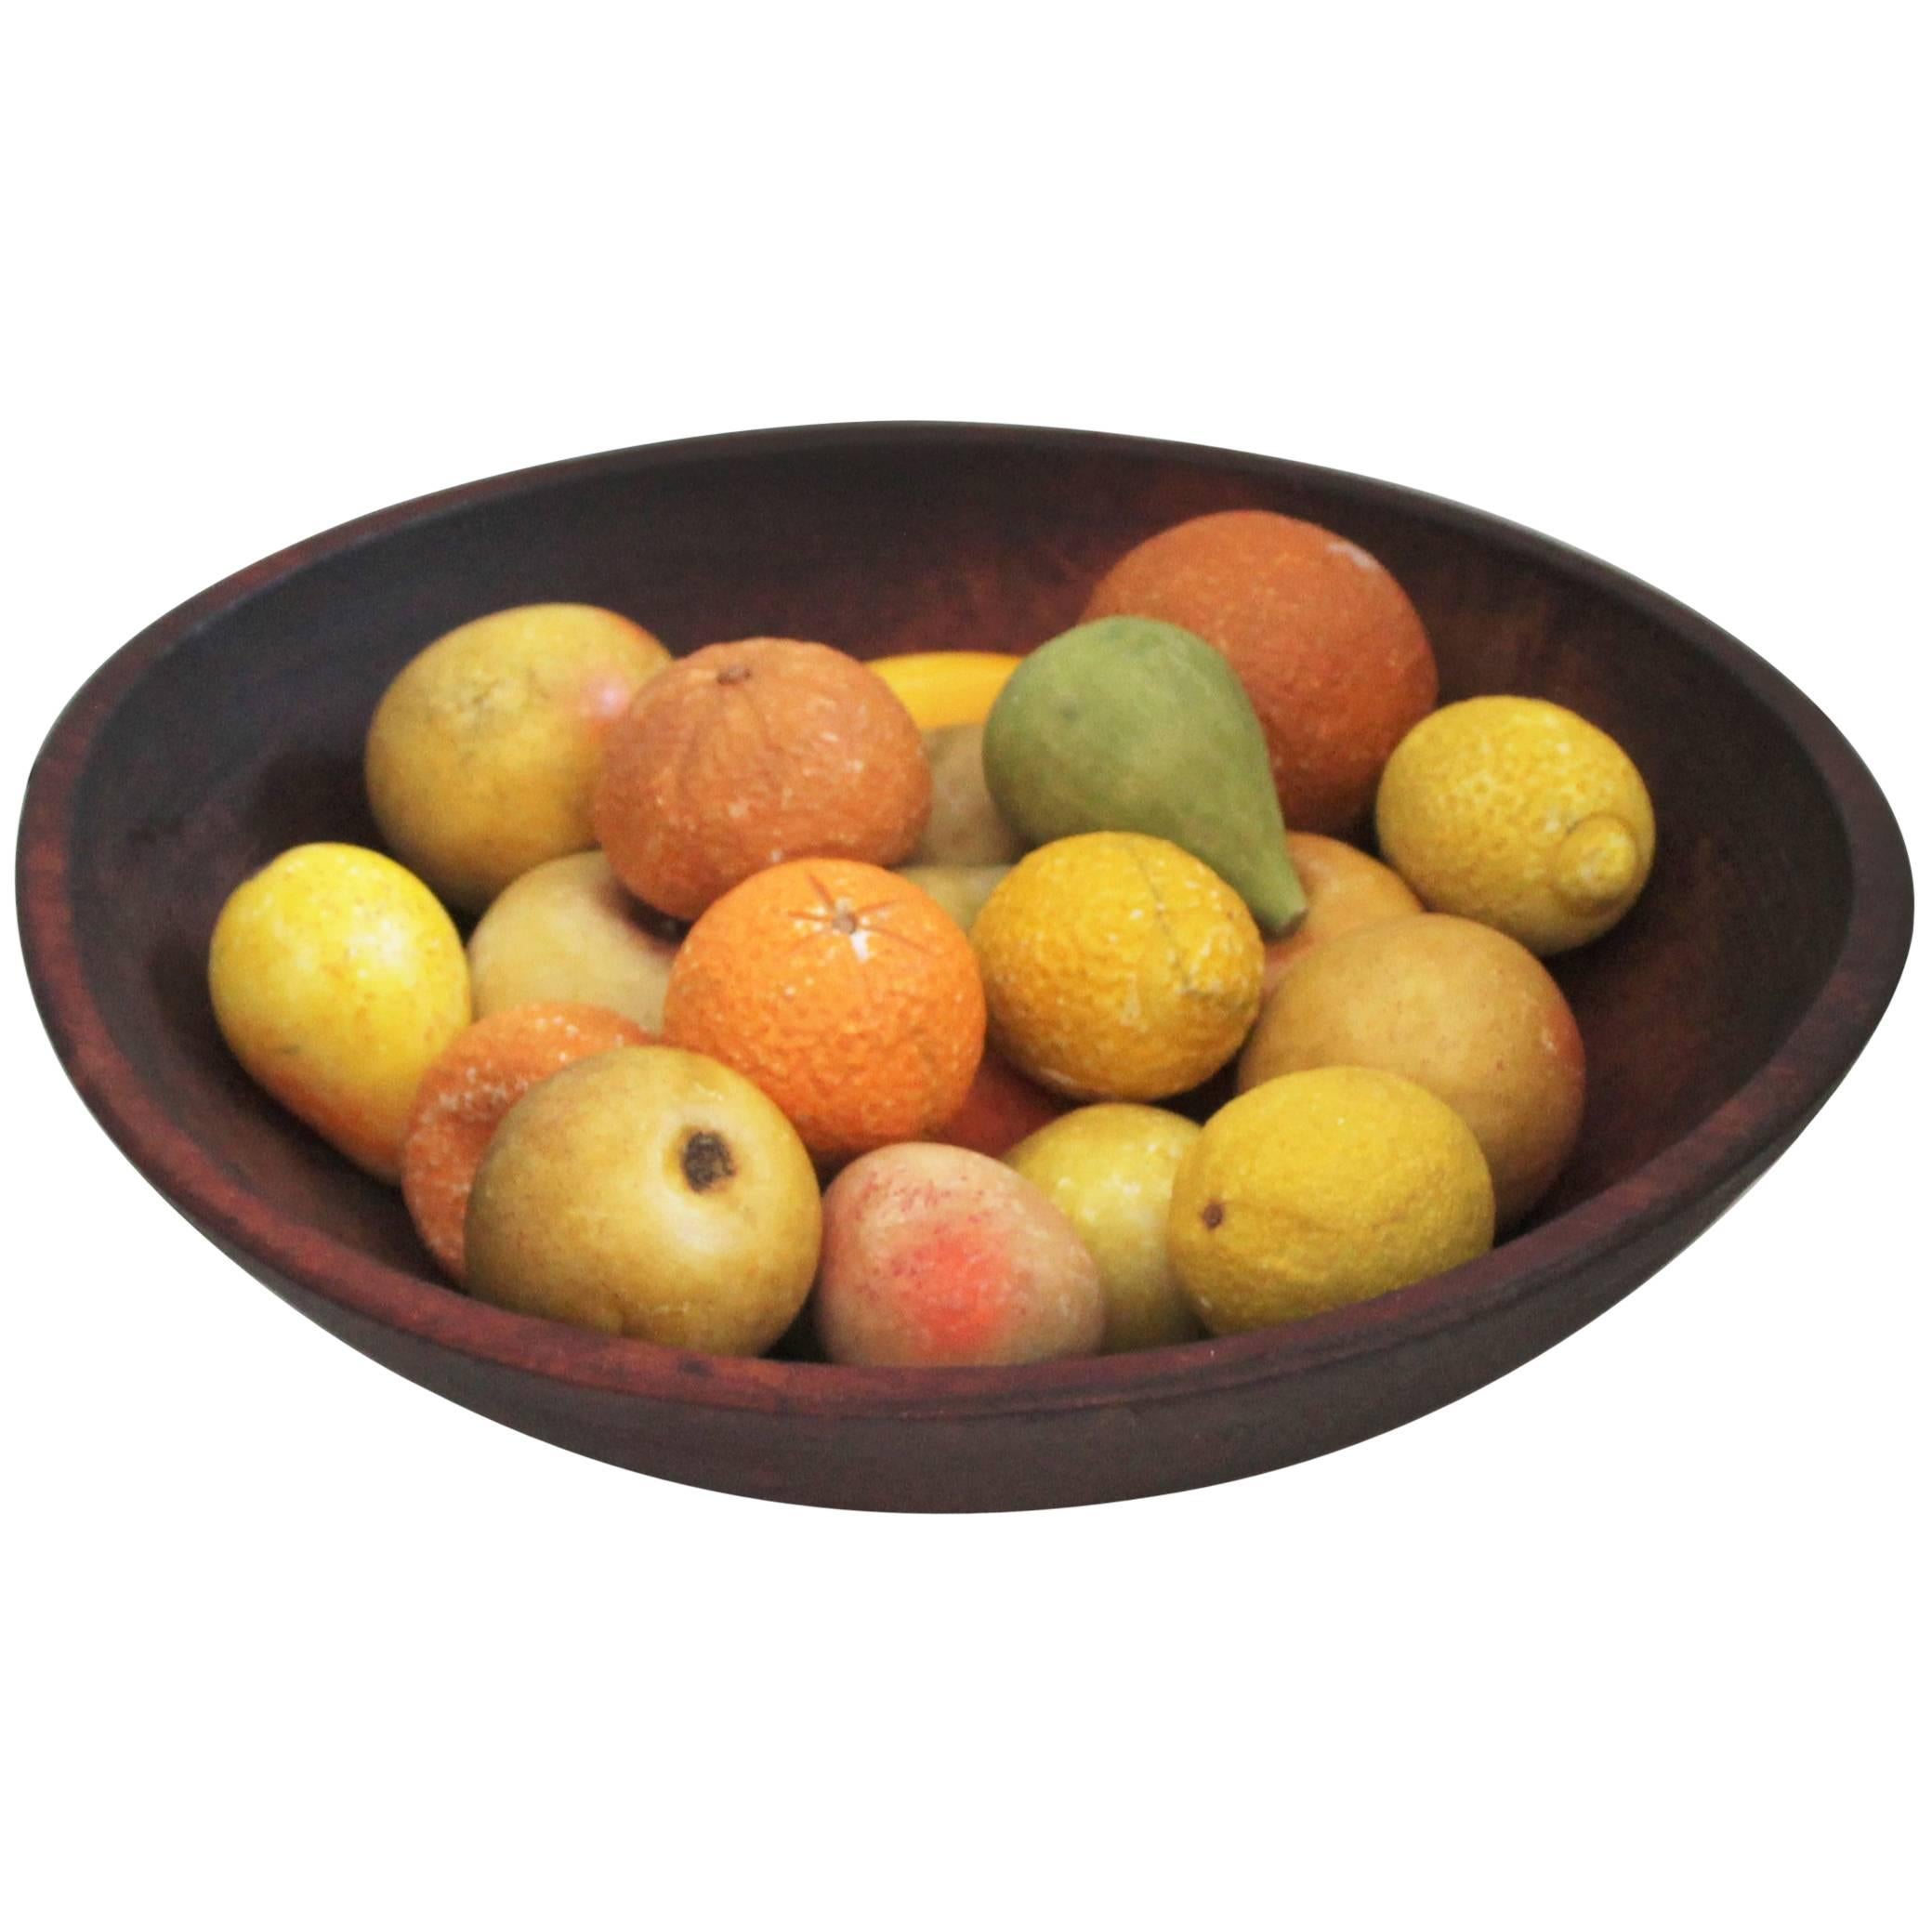 19th Century Wood Butter Bowl with Collection, 24 Pieces Stone Fruit